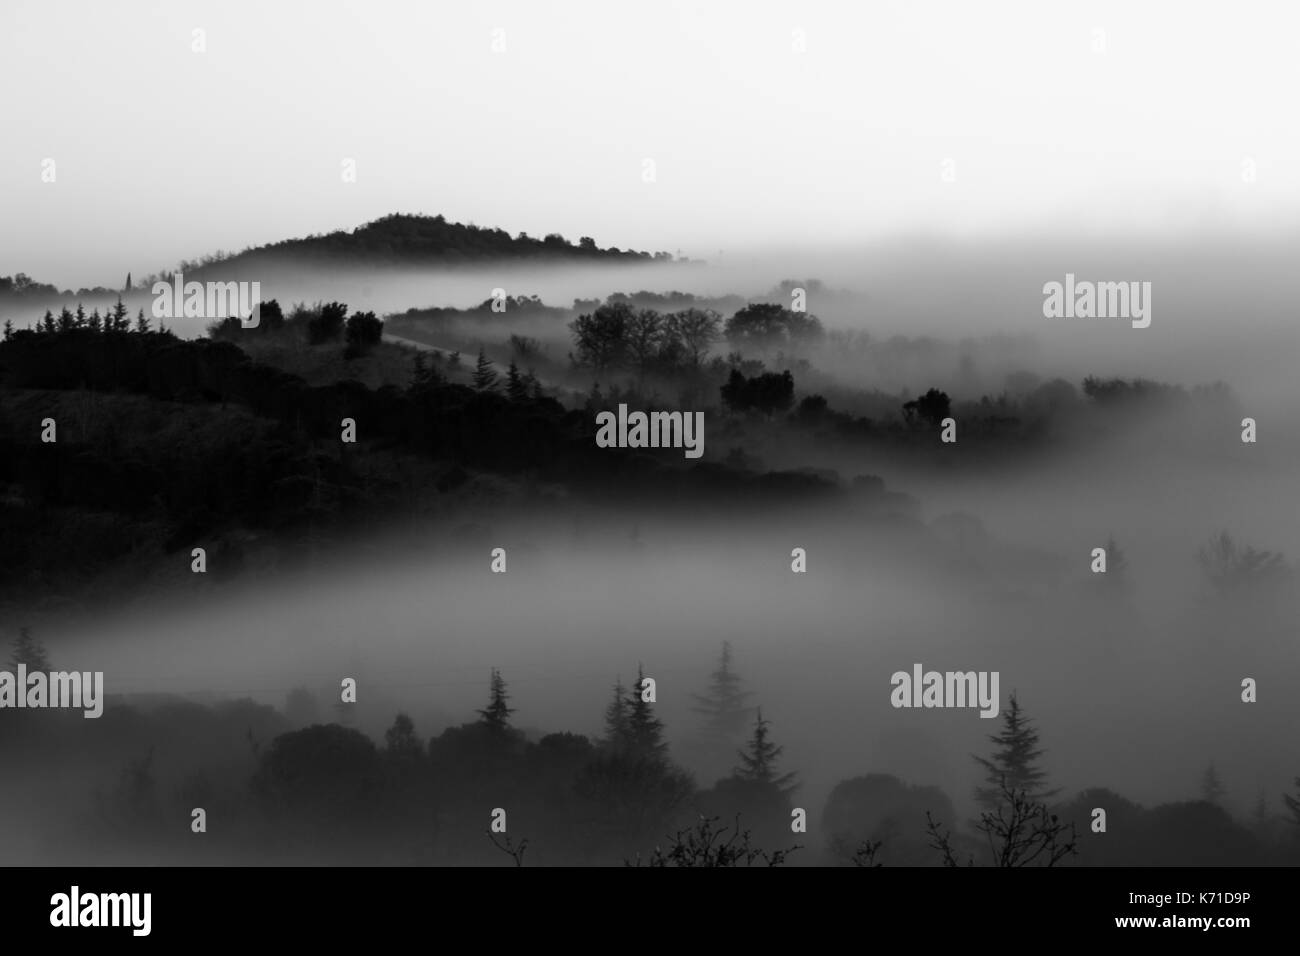 Hills and trees emerging from a valley filled by fog Stock Photo